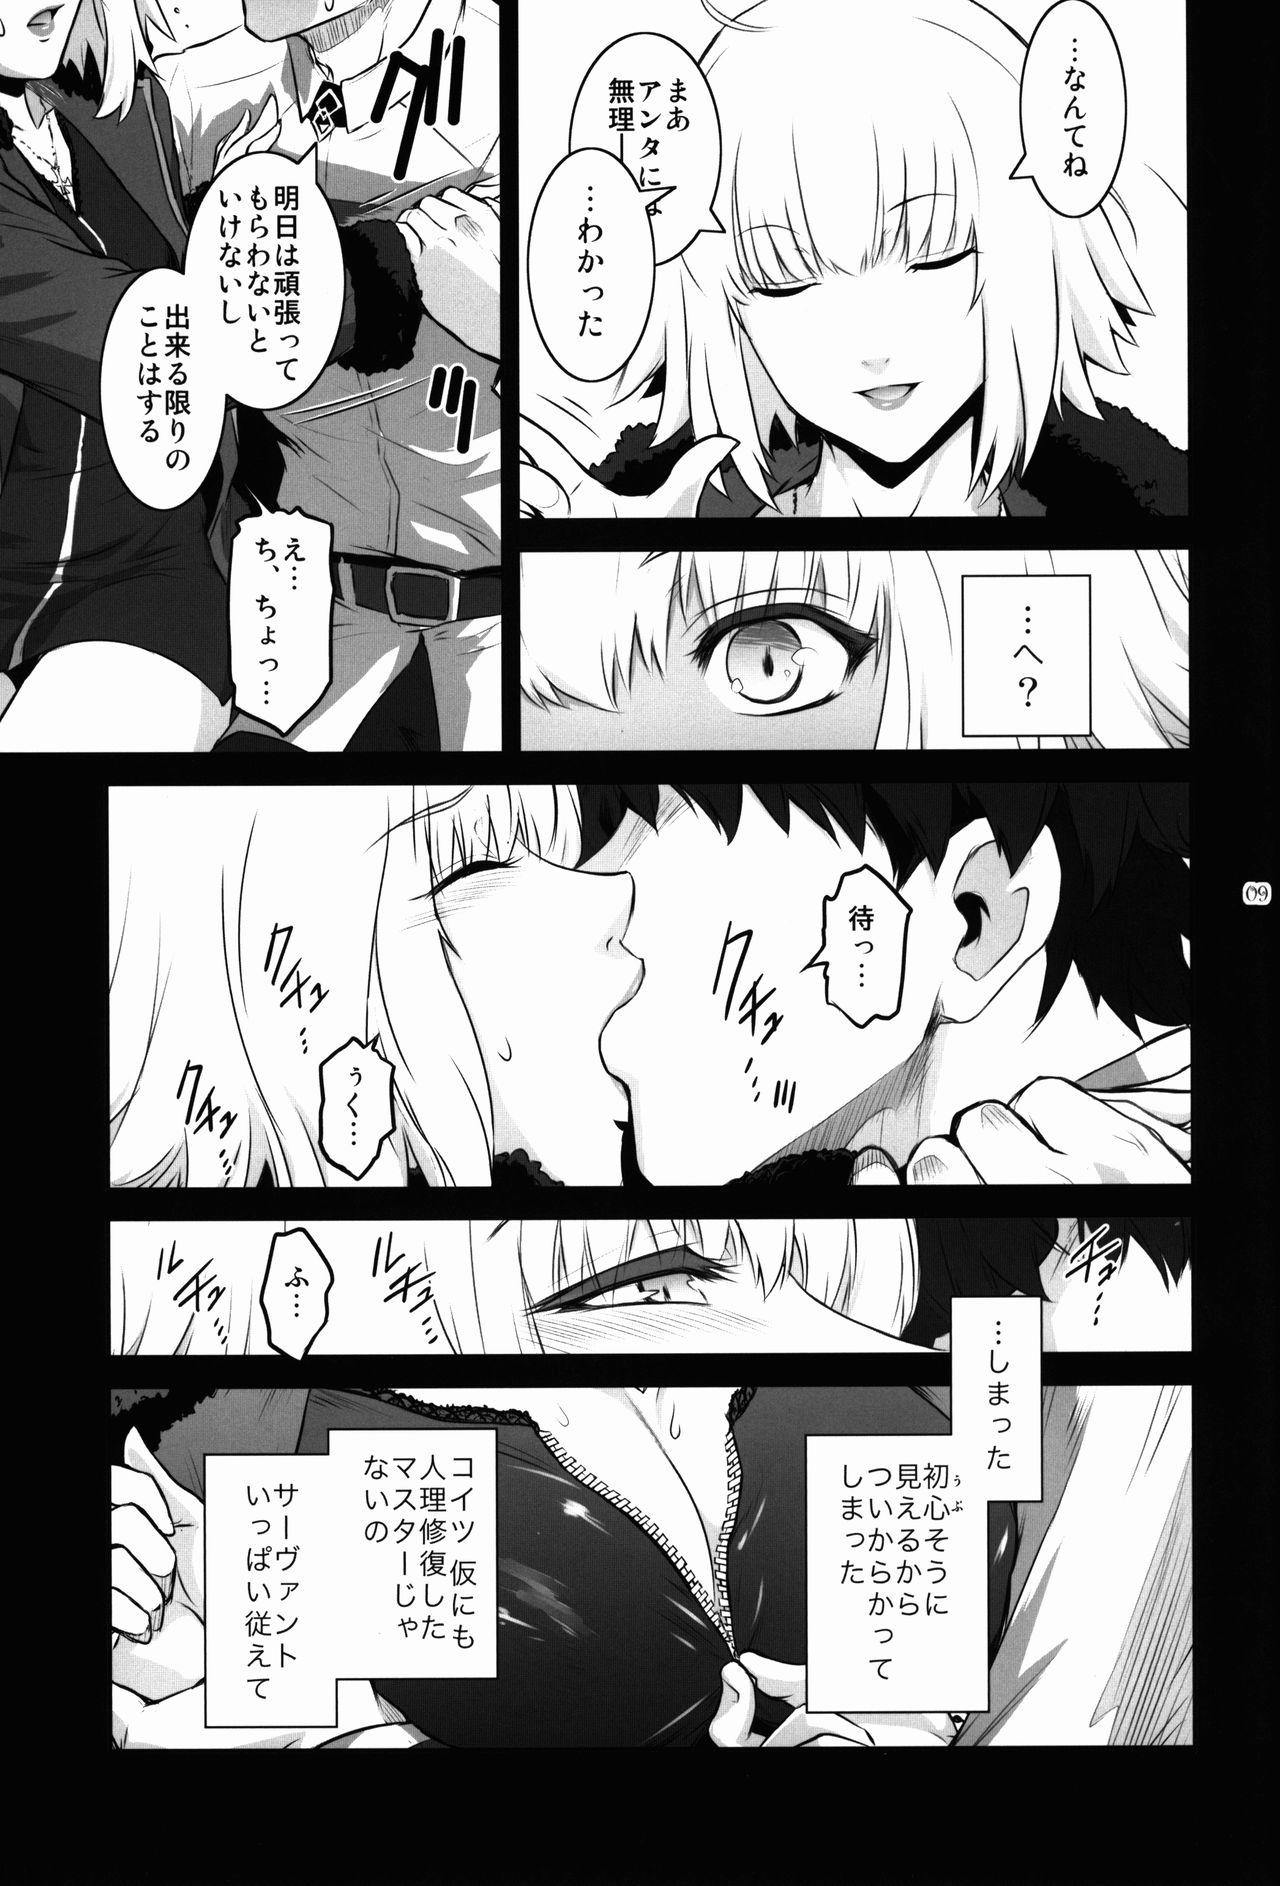 Japanese MANHUNT - Fate grand order And - Page 9